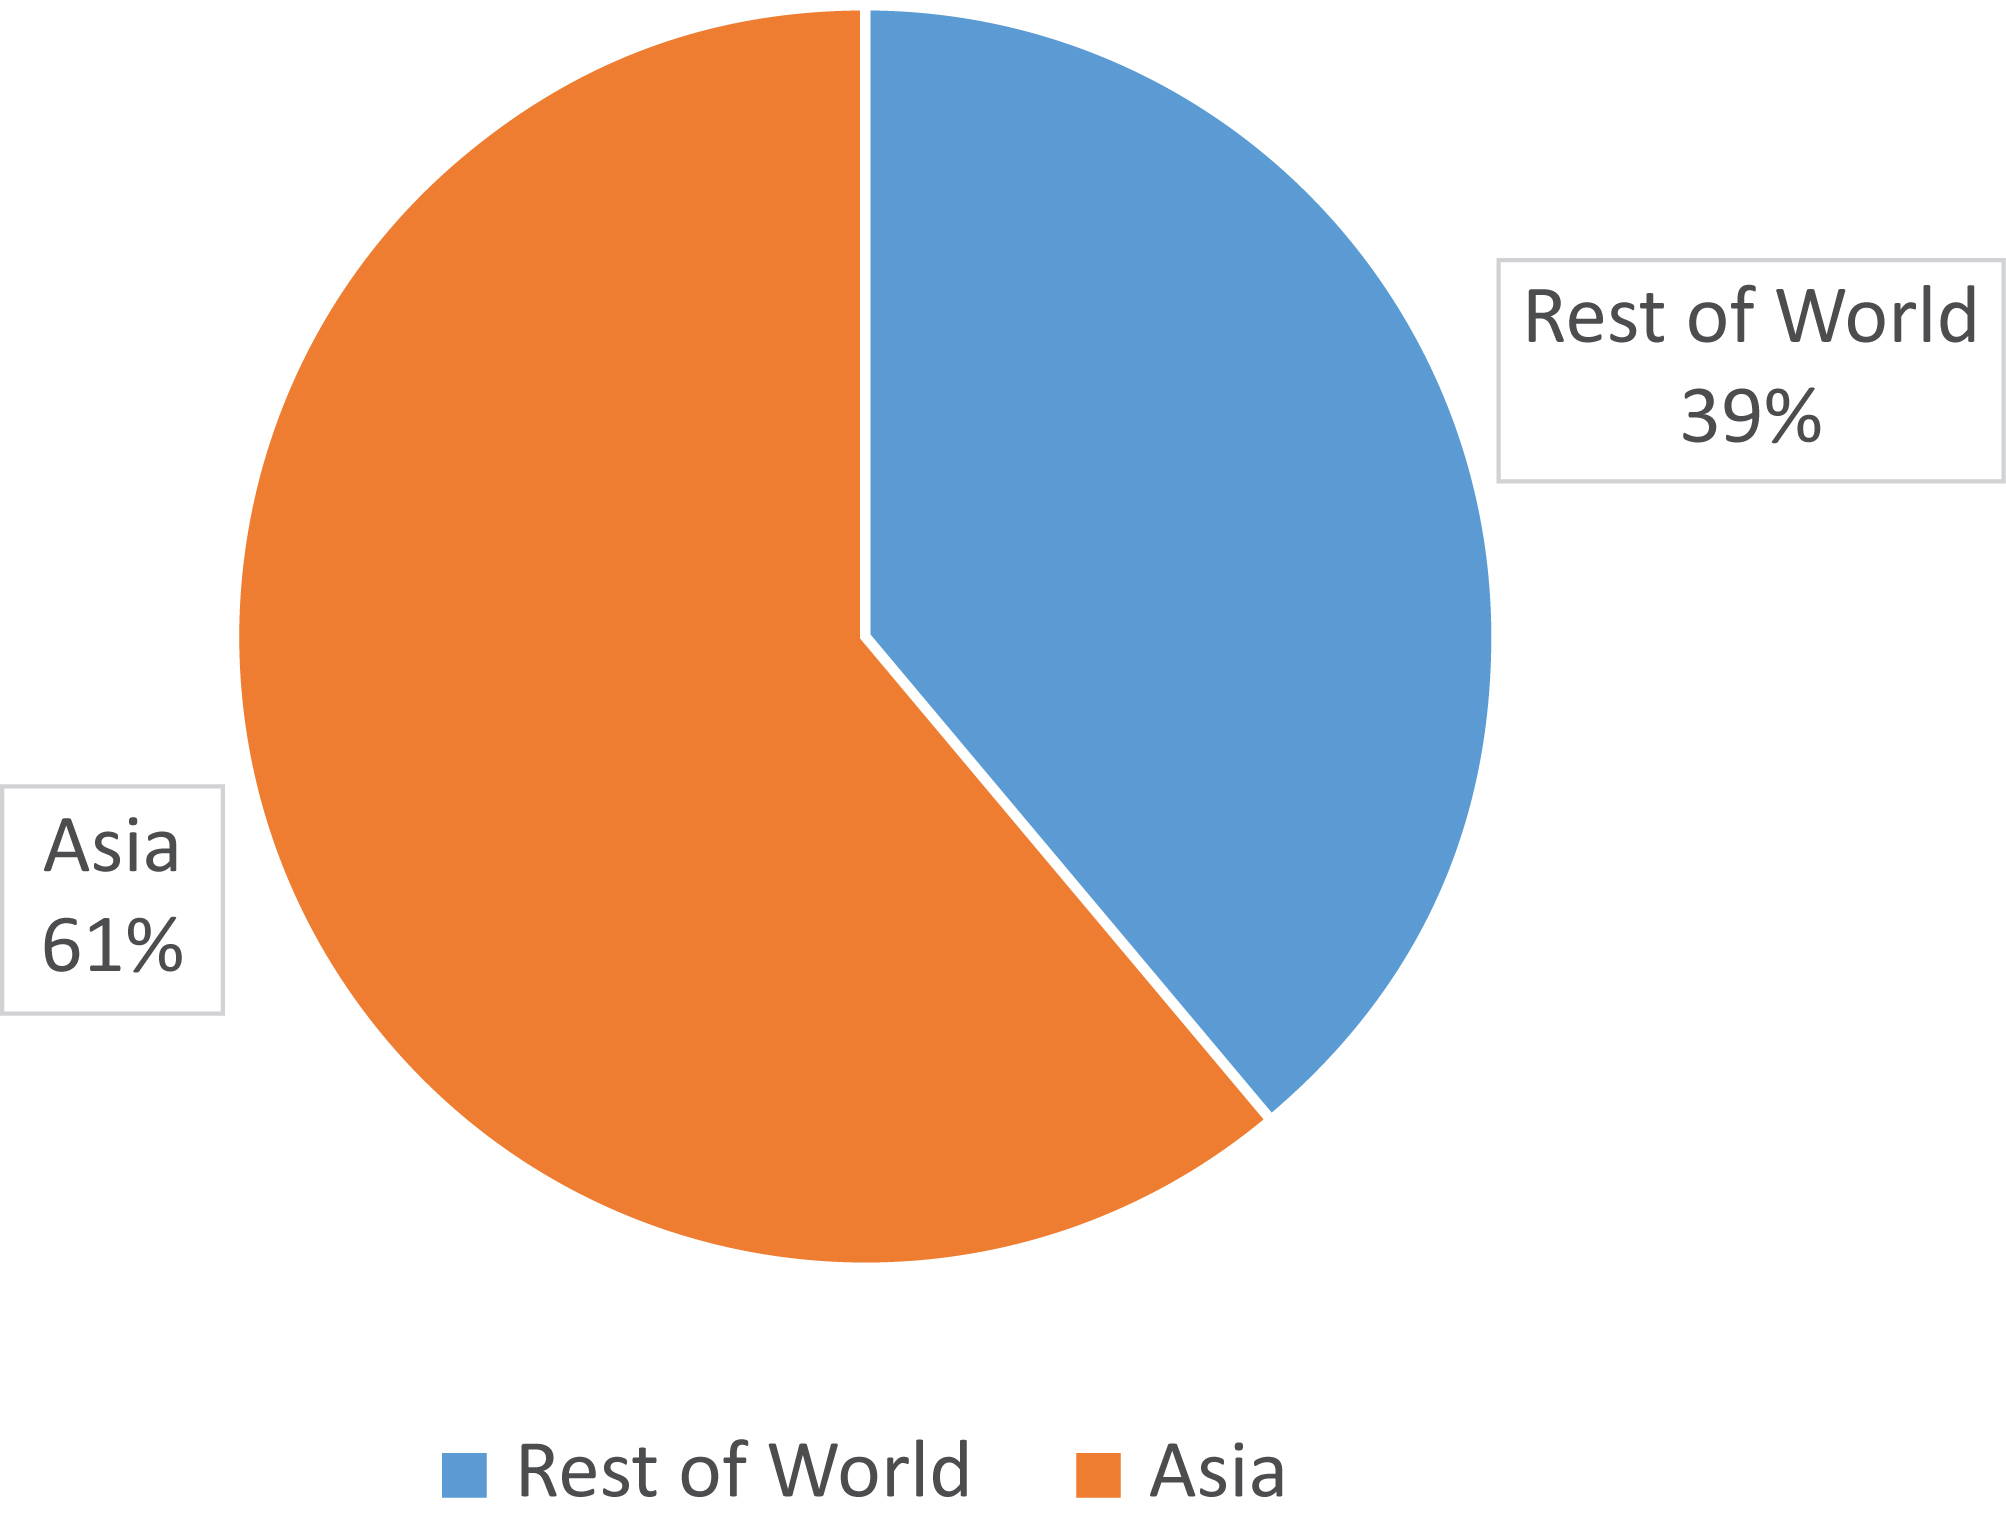 Pie chart showing 61% of employees are located in Asia with the remaining 39% located in the rest of the world